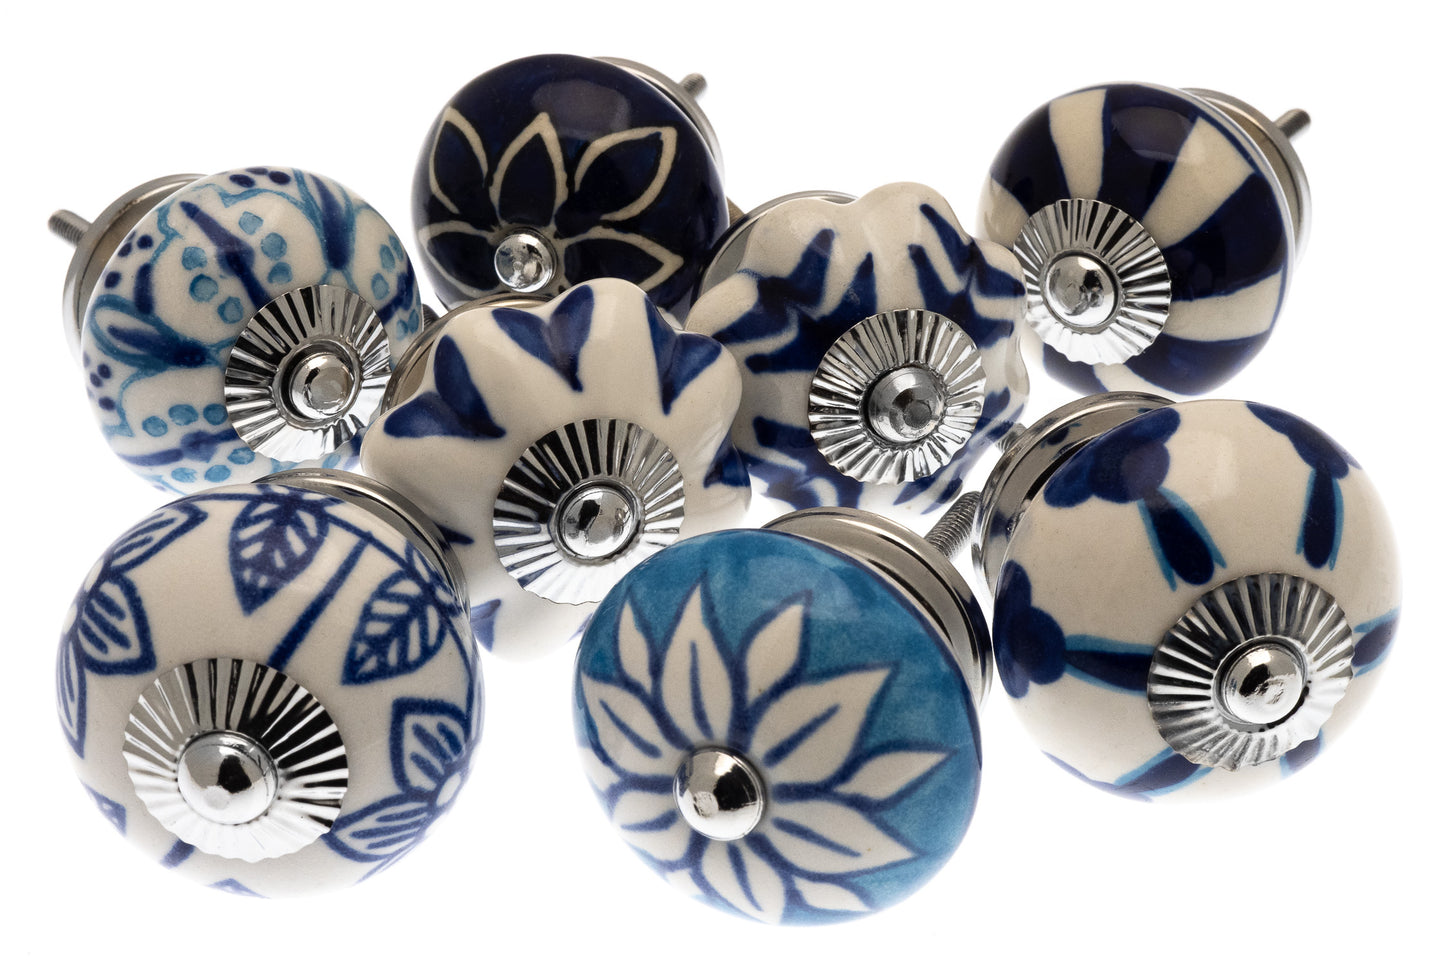 Cupboard Knobs in Mixed Blues Wardrobe Kitchen Pulls Pack of 8